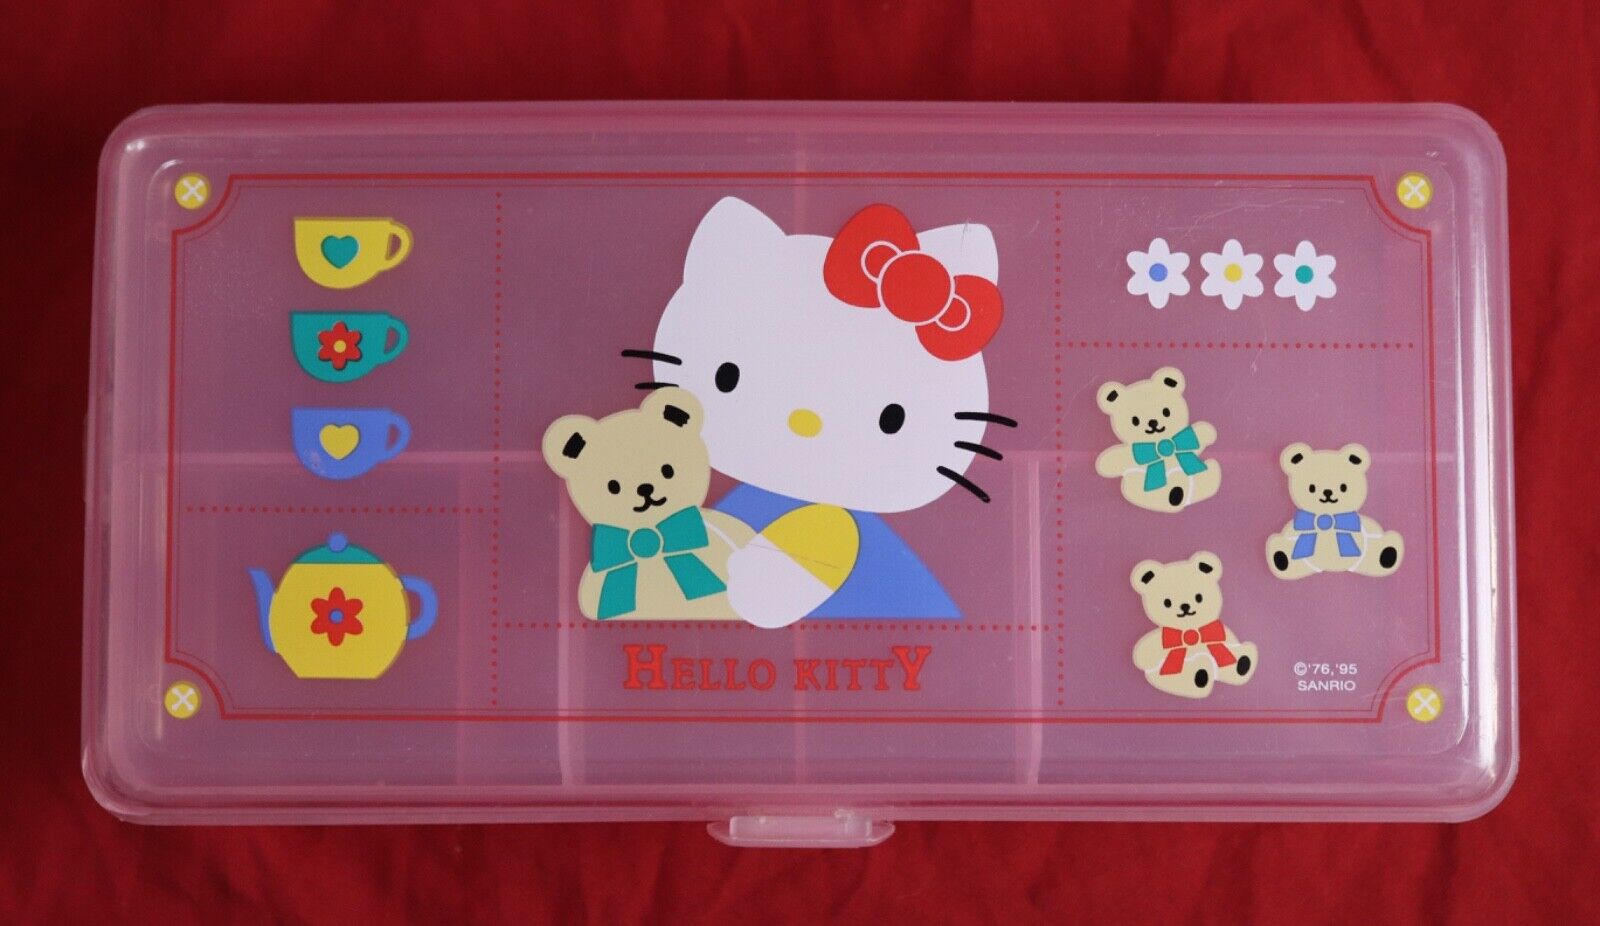 Hello Kitty Jewelry Box - 1995 Vintage Sanrio - Pink Plastic w/ Removable Tray